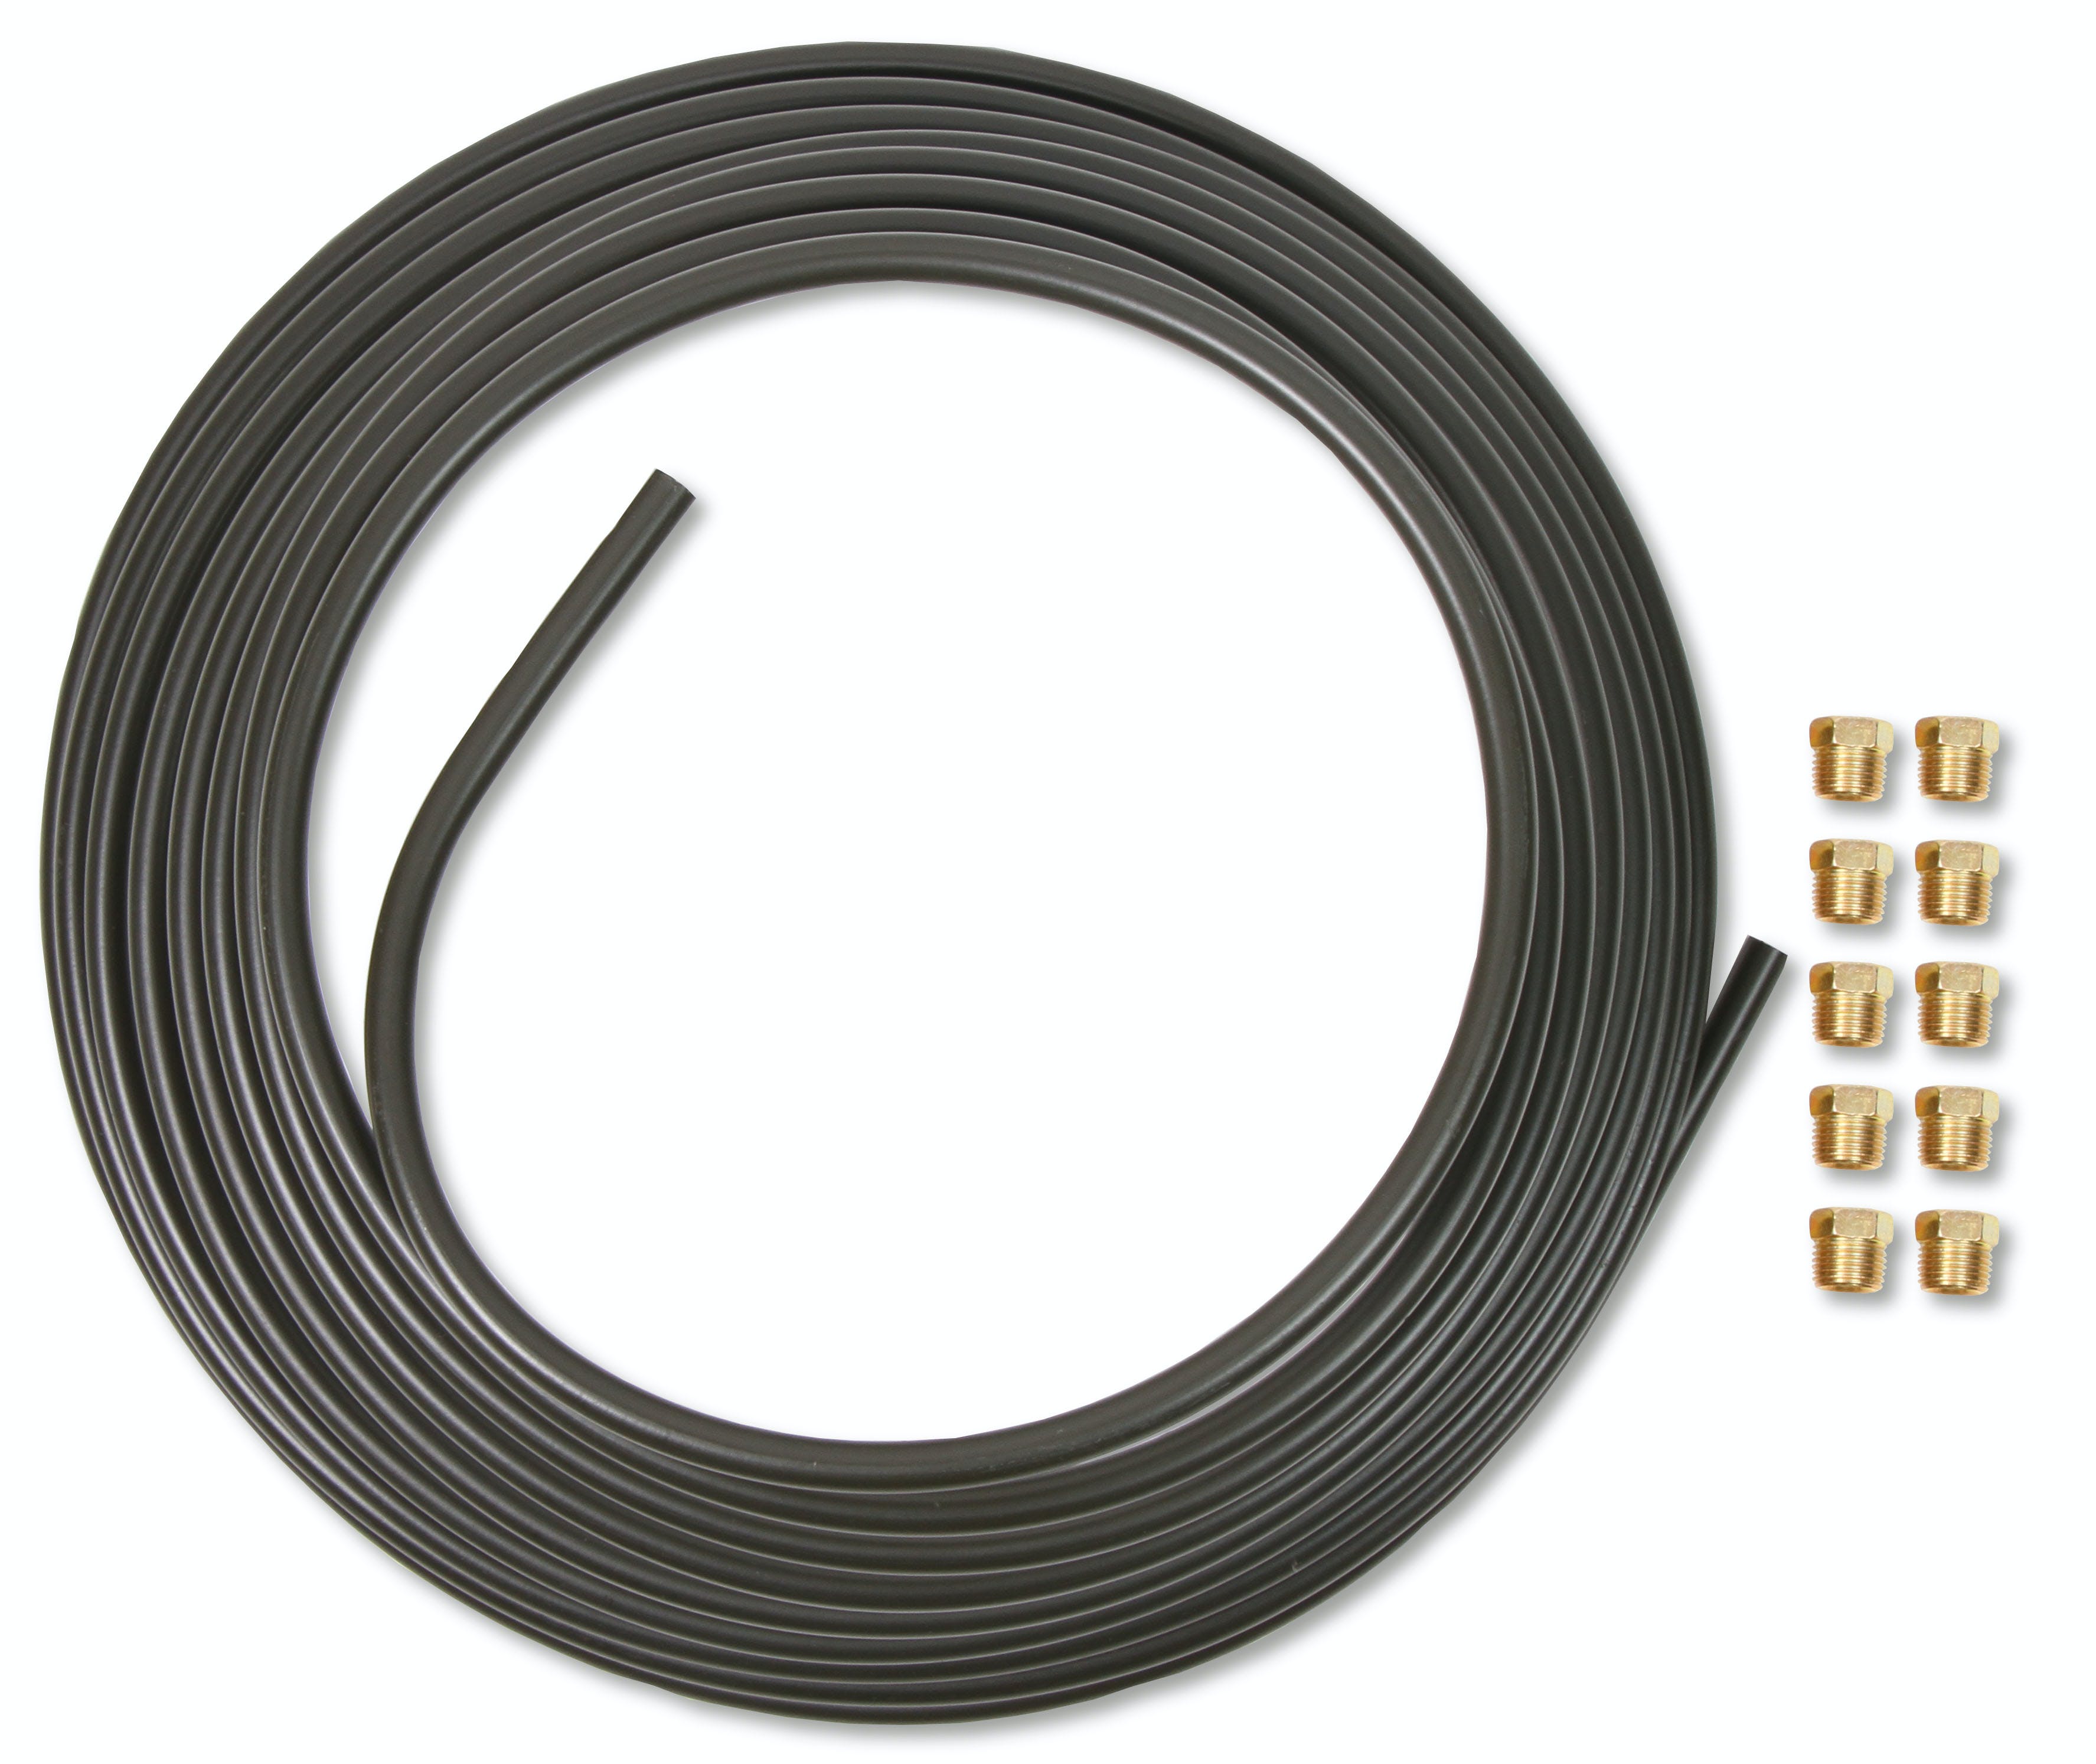 Earl's Performance Plumbing ZZ6616KERL 3/8 IN X 25 FT COIL and FITTING KIT - OLIV